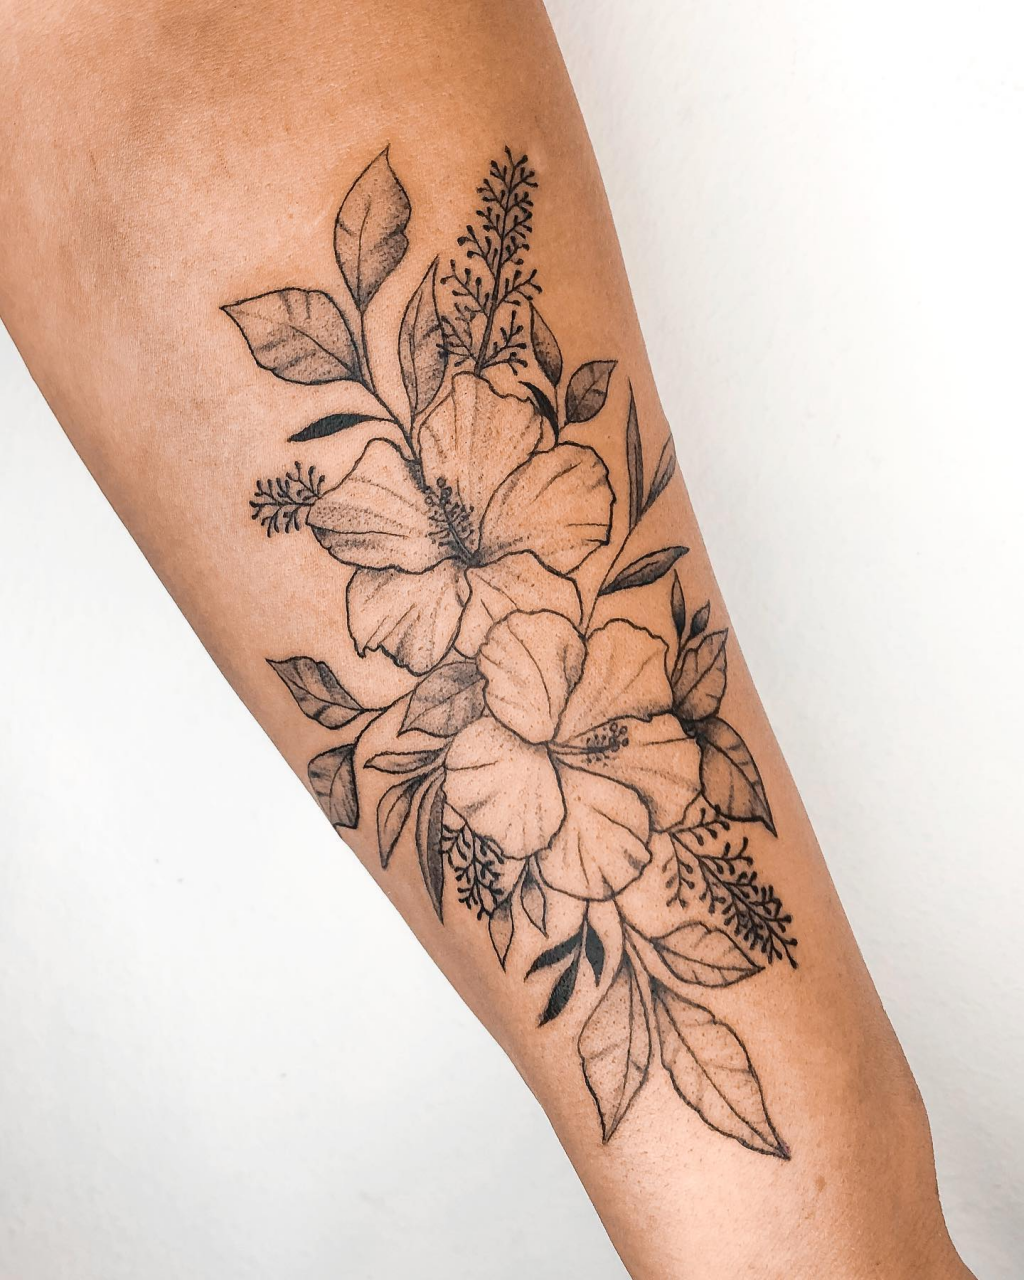 Delicate Nature-Inspired Tattoos are Perfectly Placed on the Wearer's Body  | Search by Muzli